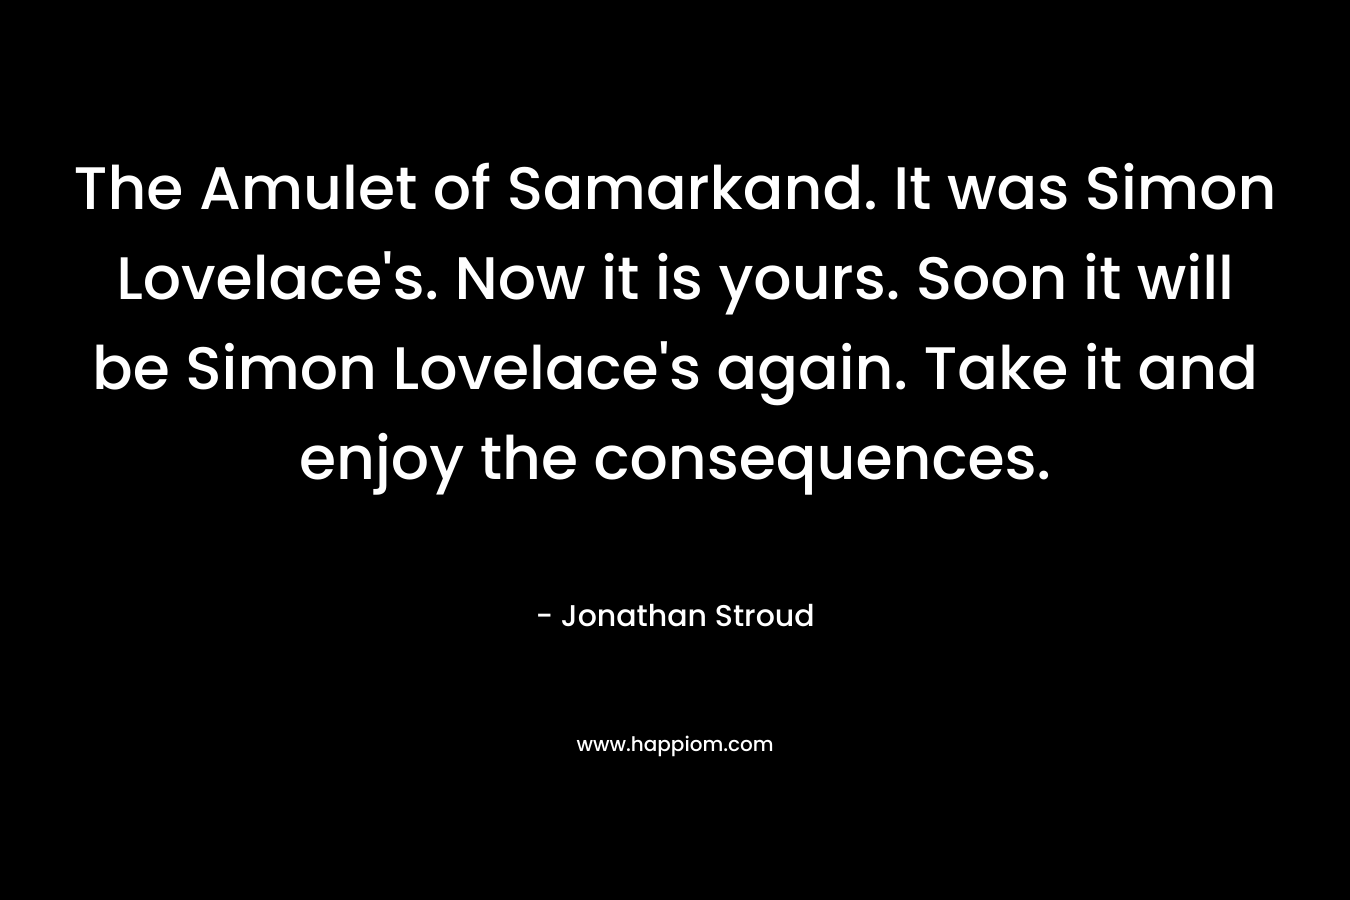 The Amulet of Samarkand. It was Simon Lovelace's. Now it is yours. Soon it will be Simon Lovelace's again. Take it and enjoy the consequences.